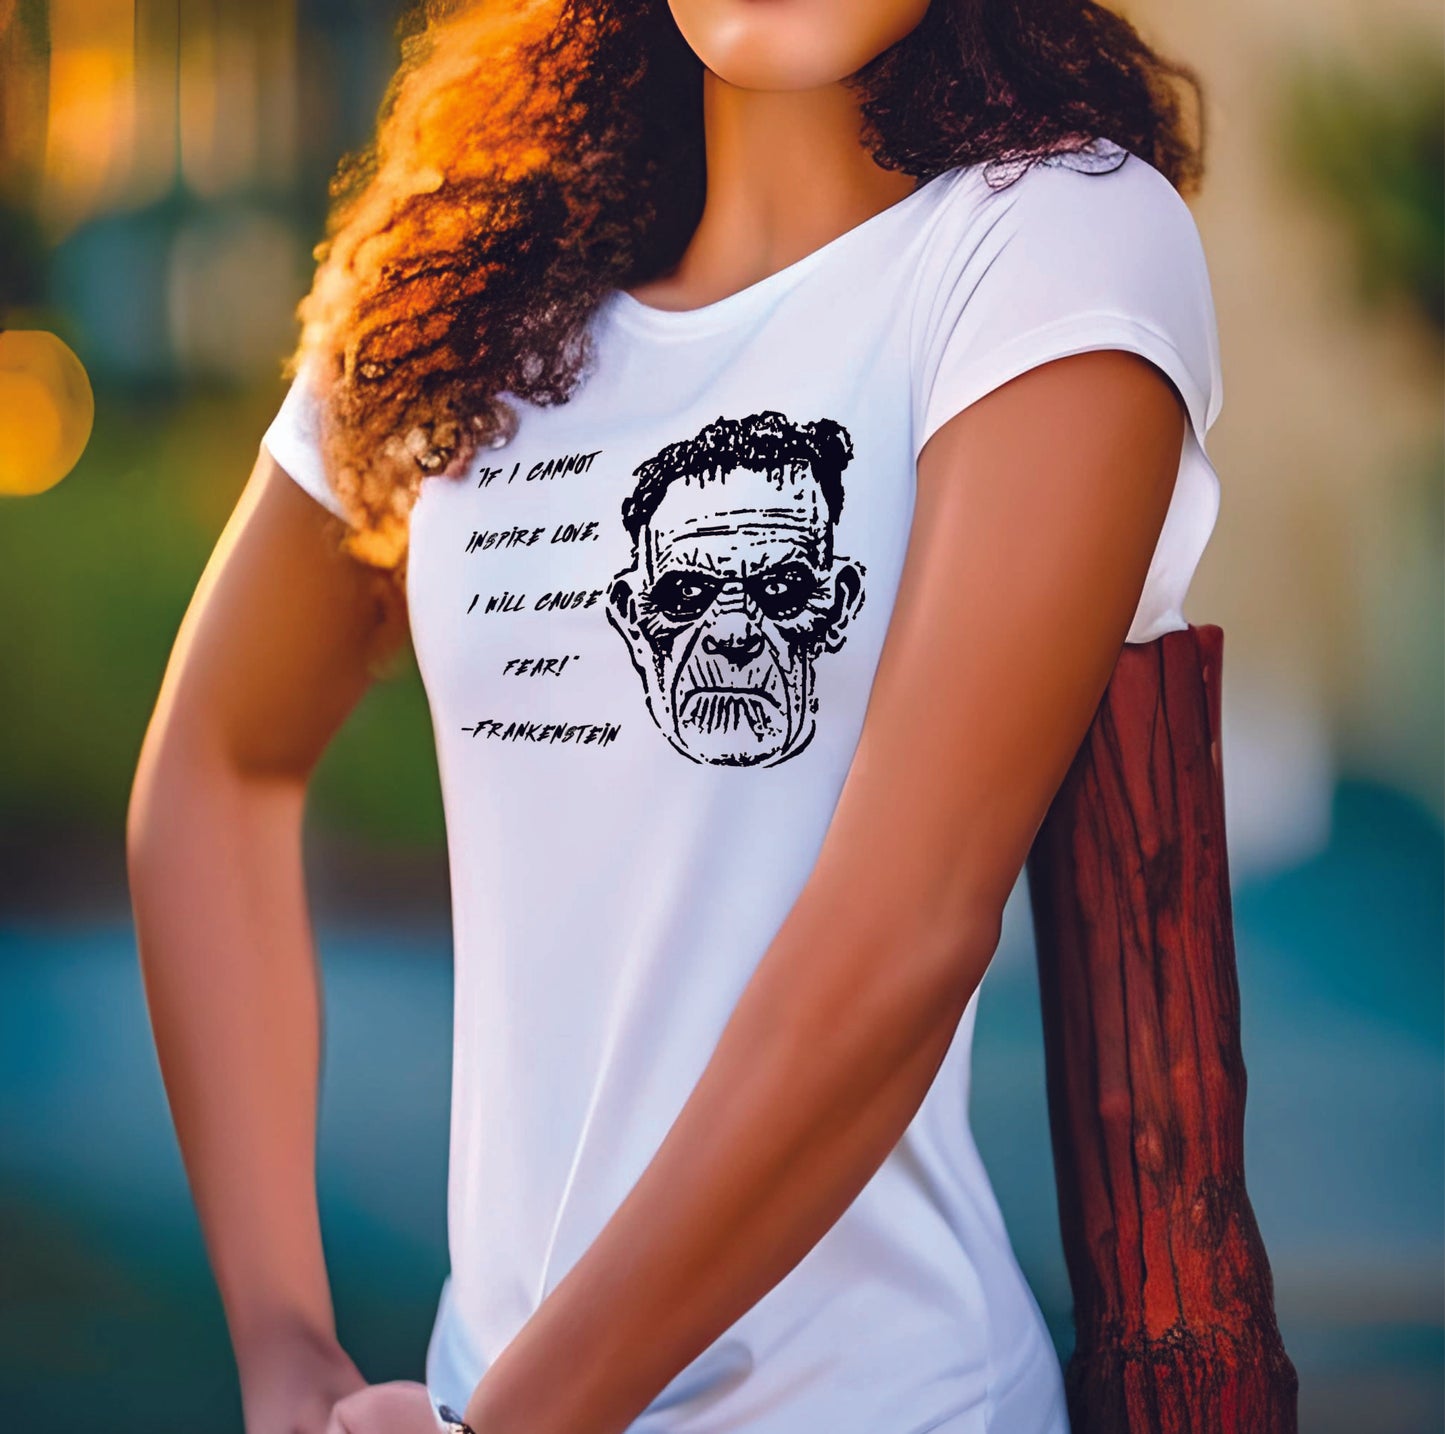 FrankenStein - If I Cannot Inspire Love, I will Cause Fear T-Shirt Design Unisex - Sizes S-XXL